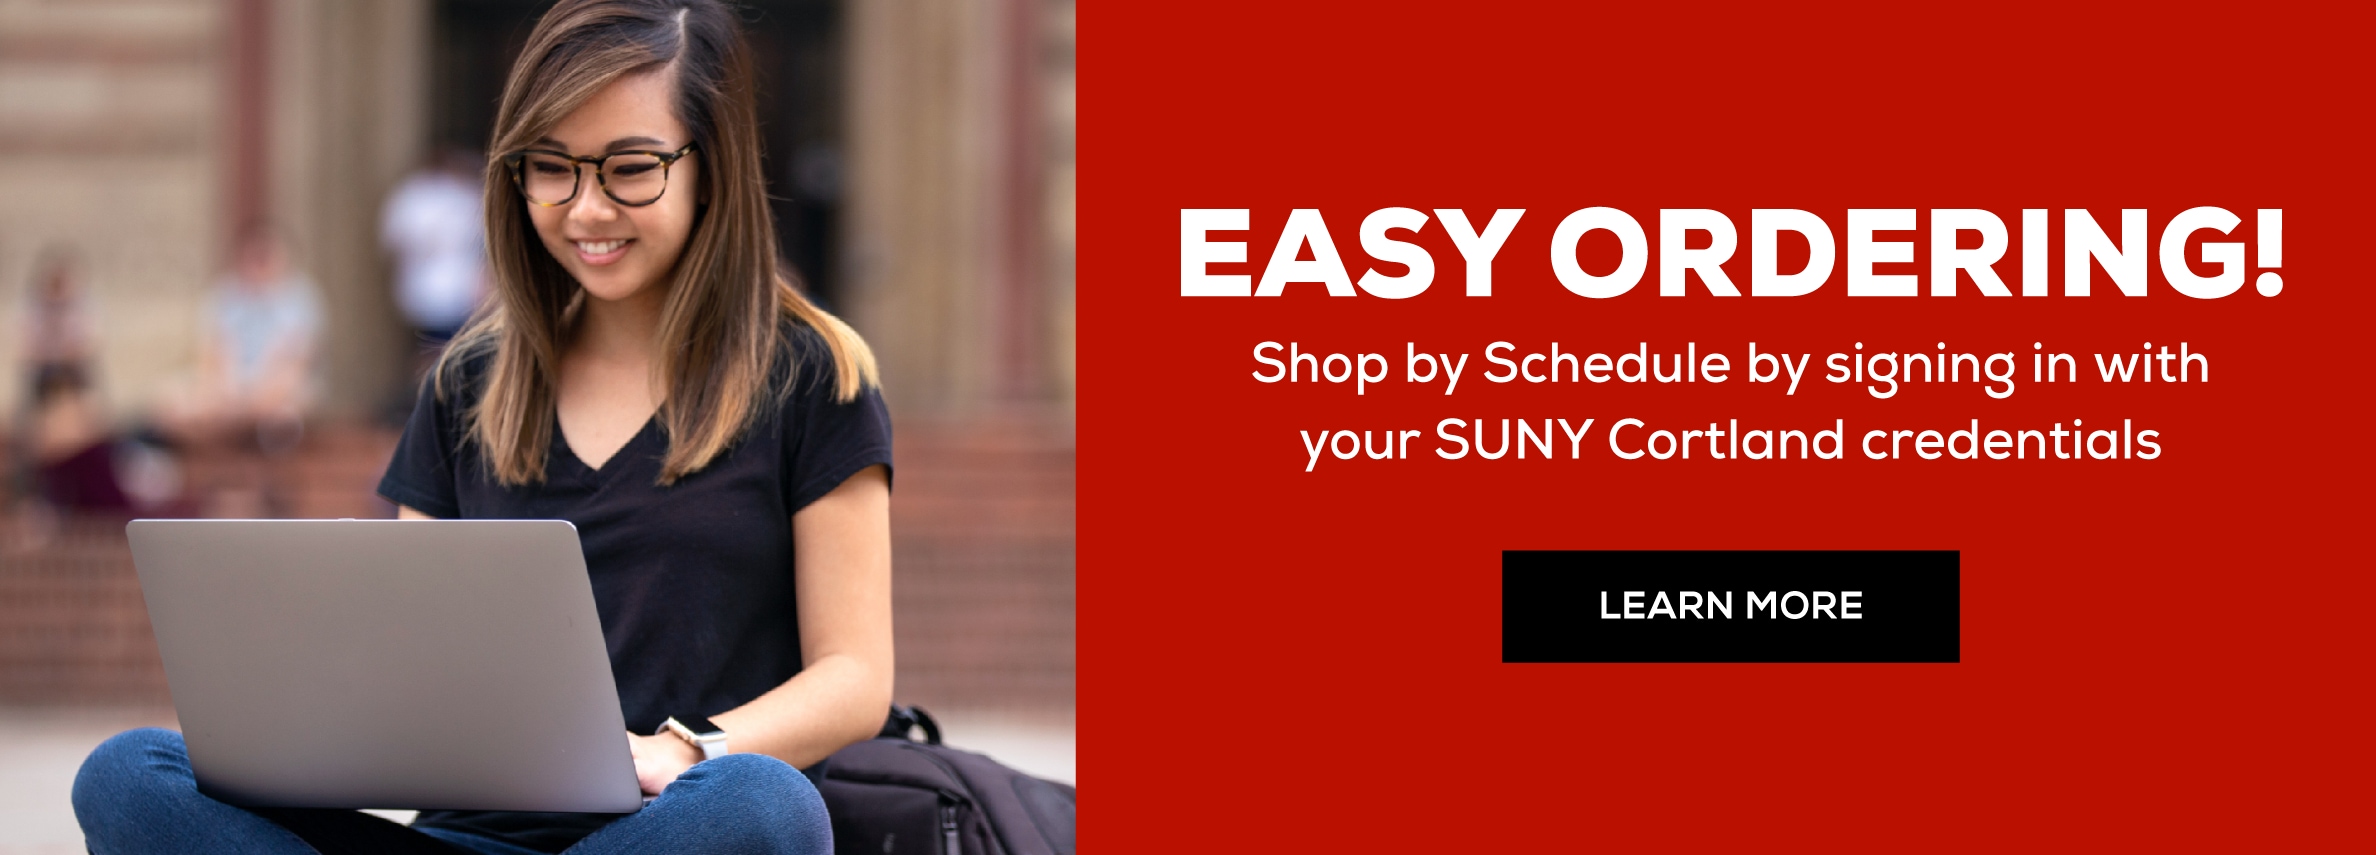 Easy Ordering. Shop by schedule by signing in with your schoolÃ¢â‚¬â„¢s credentials. Learn more.